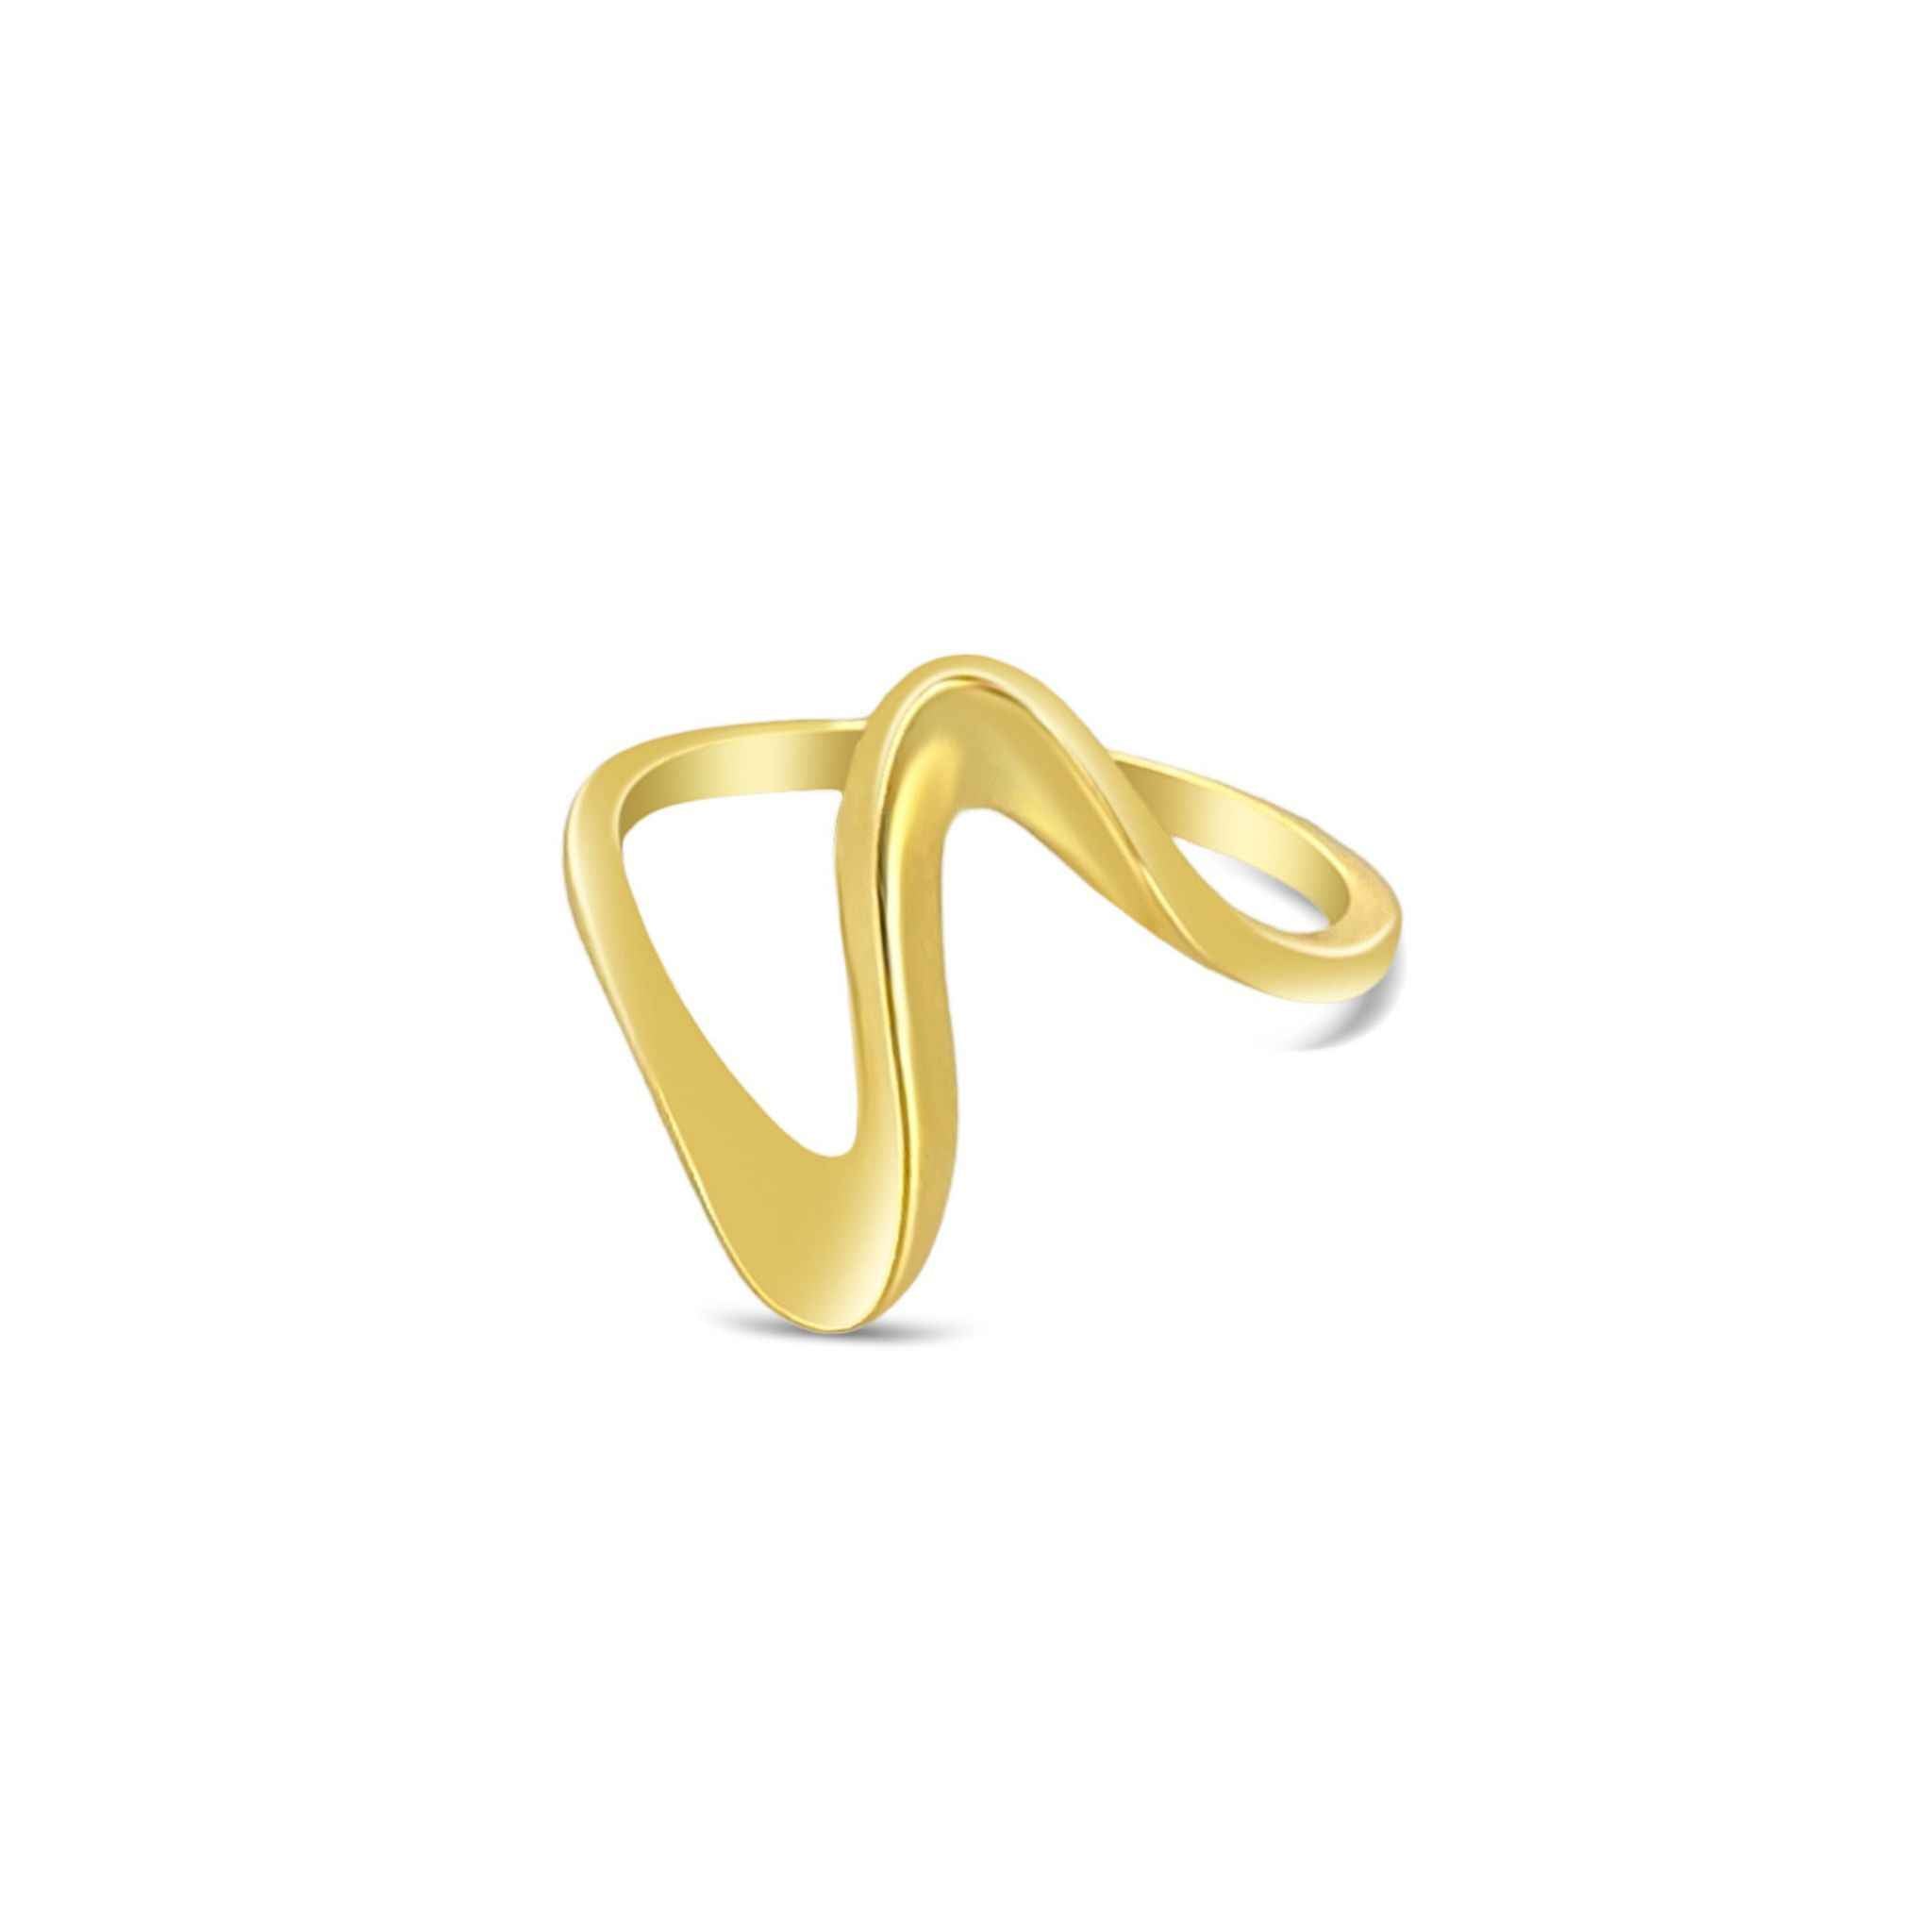 Delicate sterling silver Zig Zag Ring in Gold by Alessandra James, perfect for everyday wear.